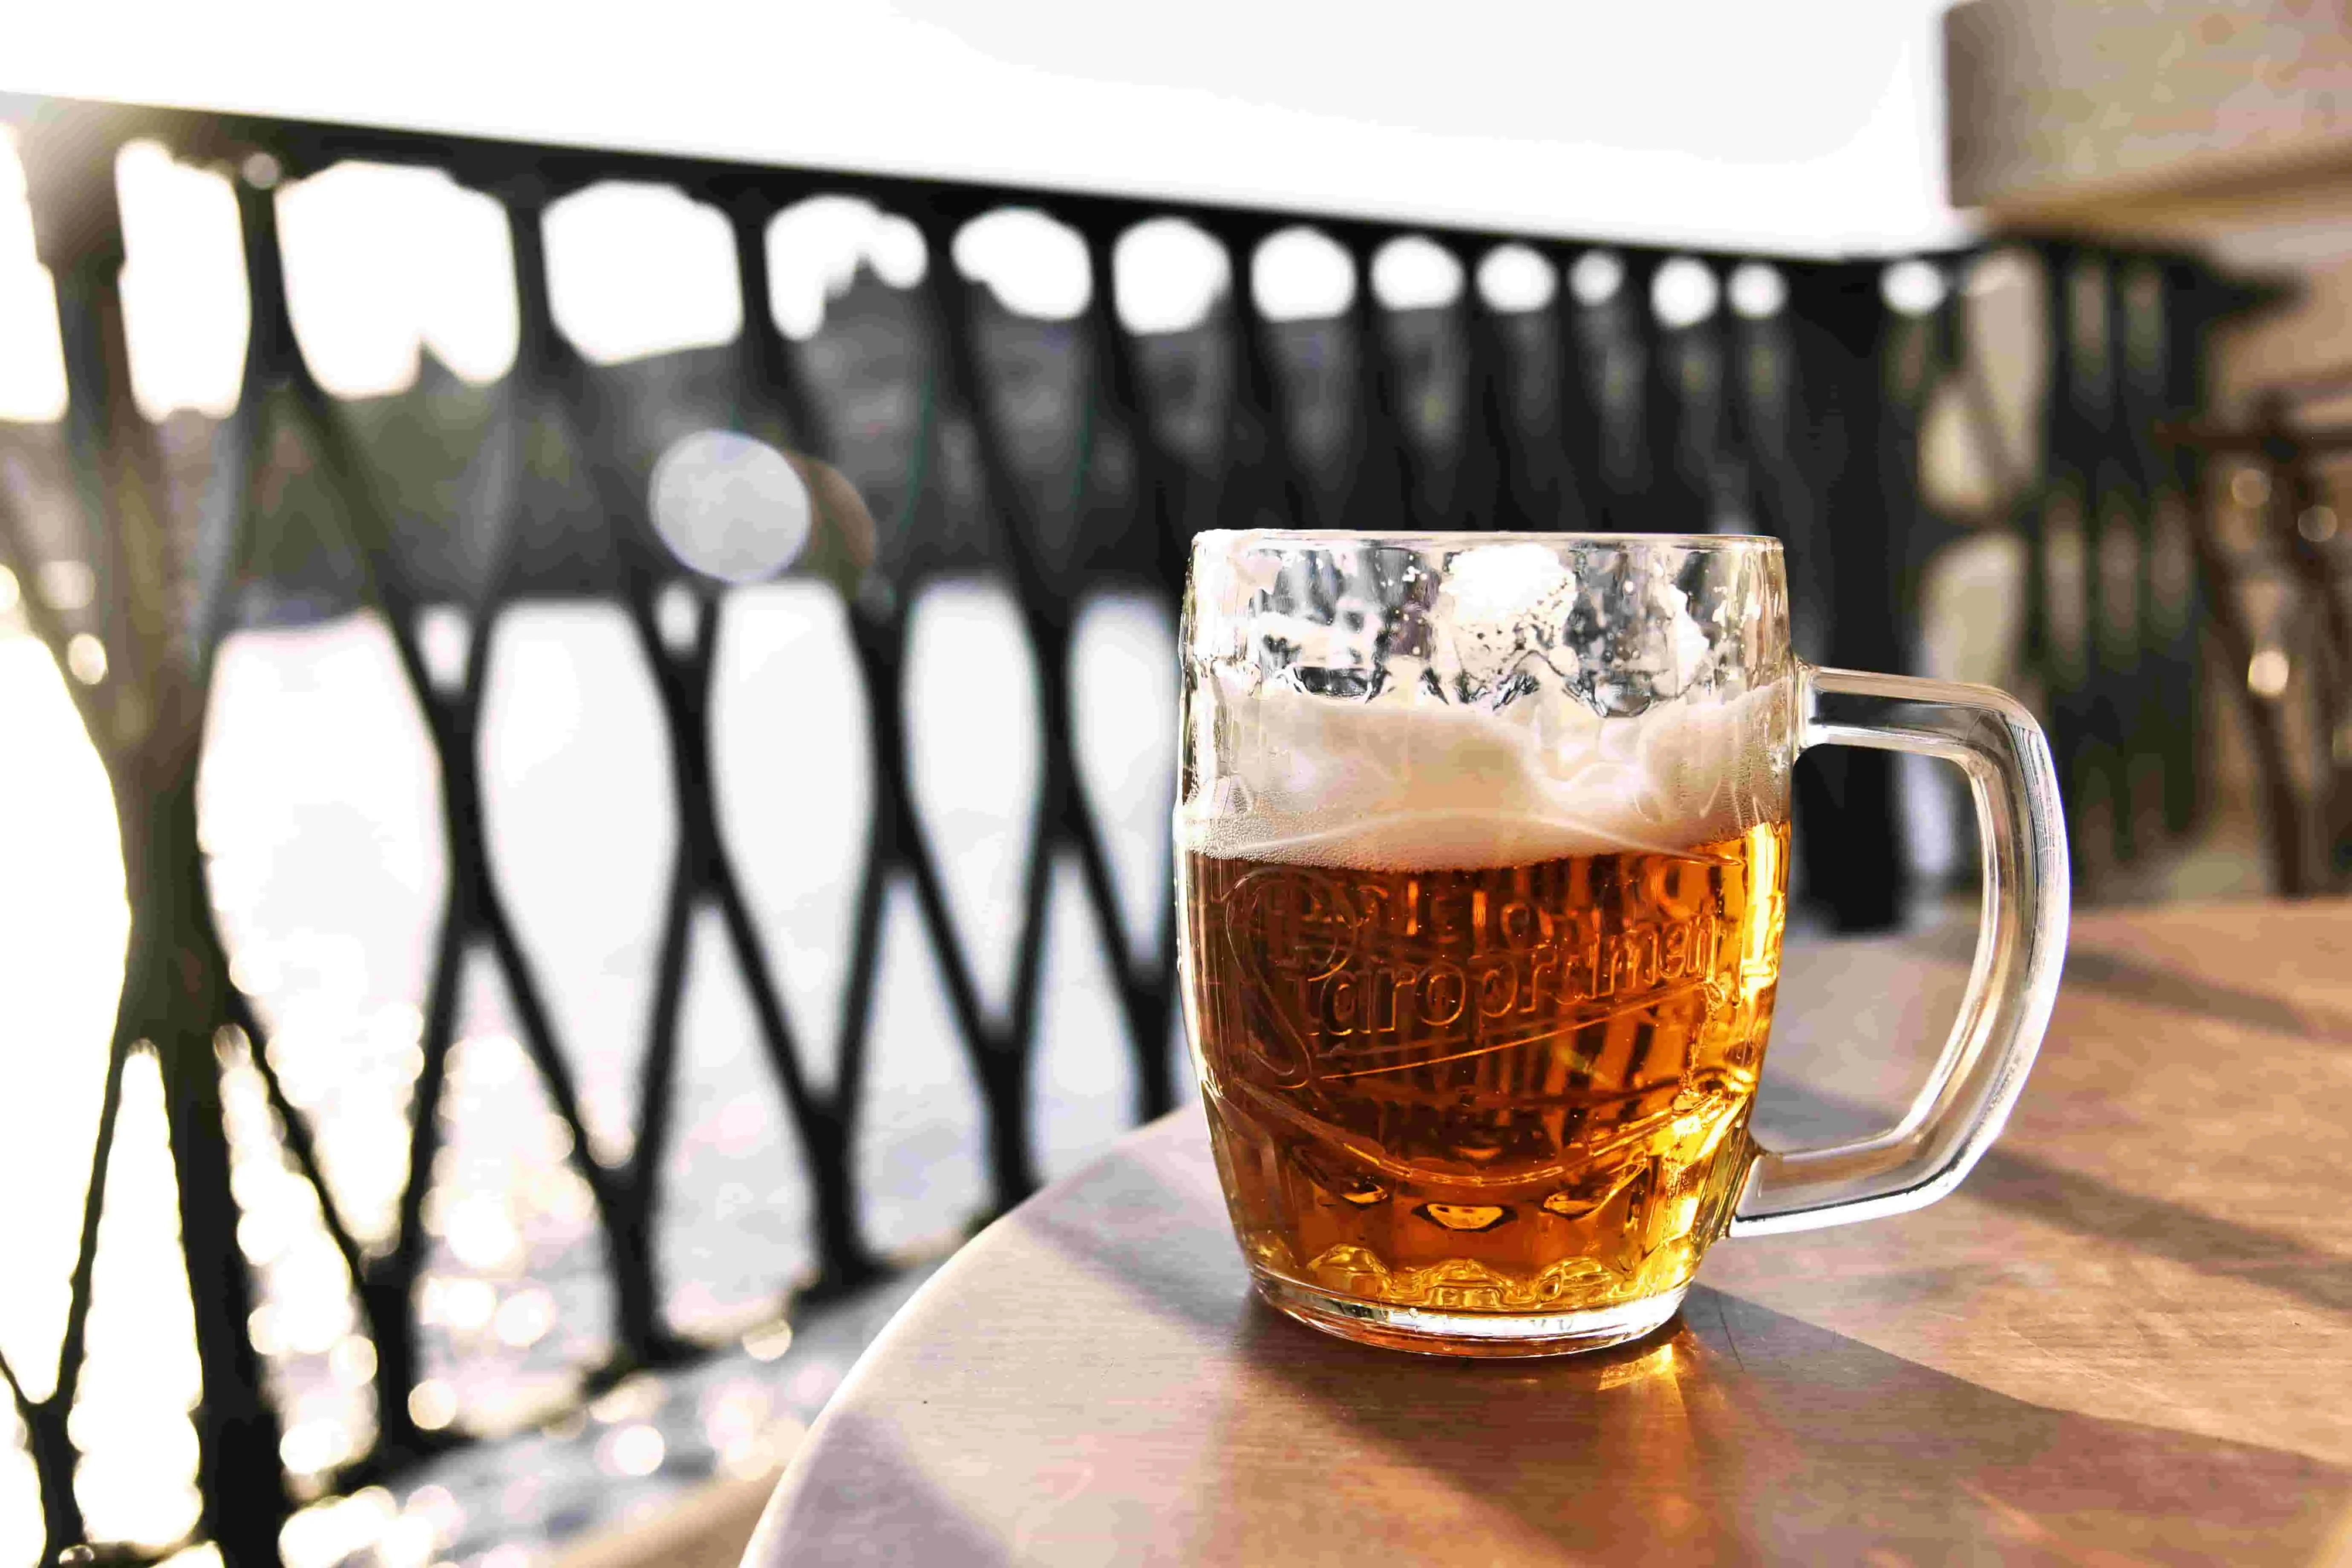 Picture of a tankard of beer on a wooden table in front of a railing